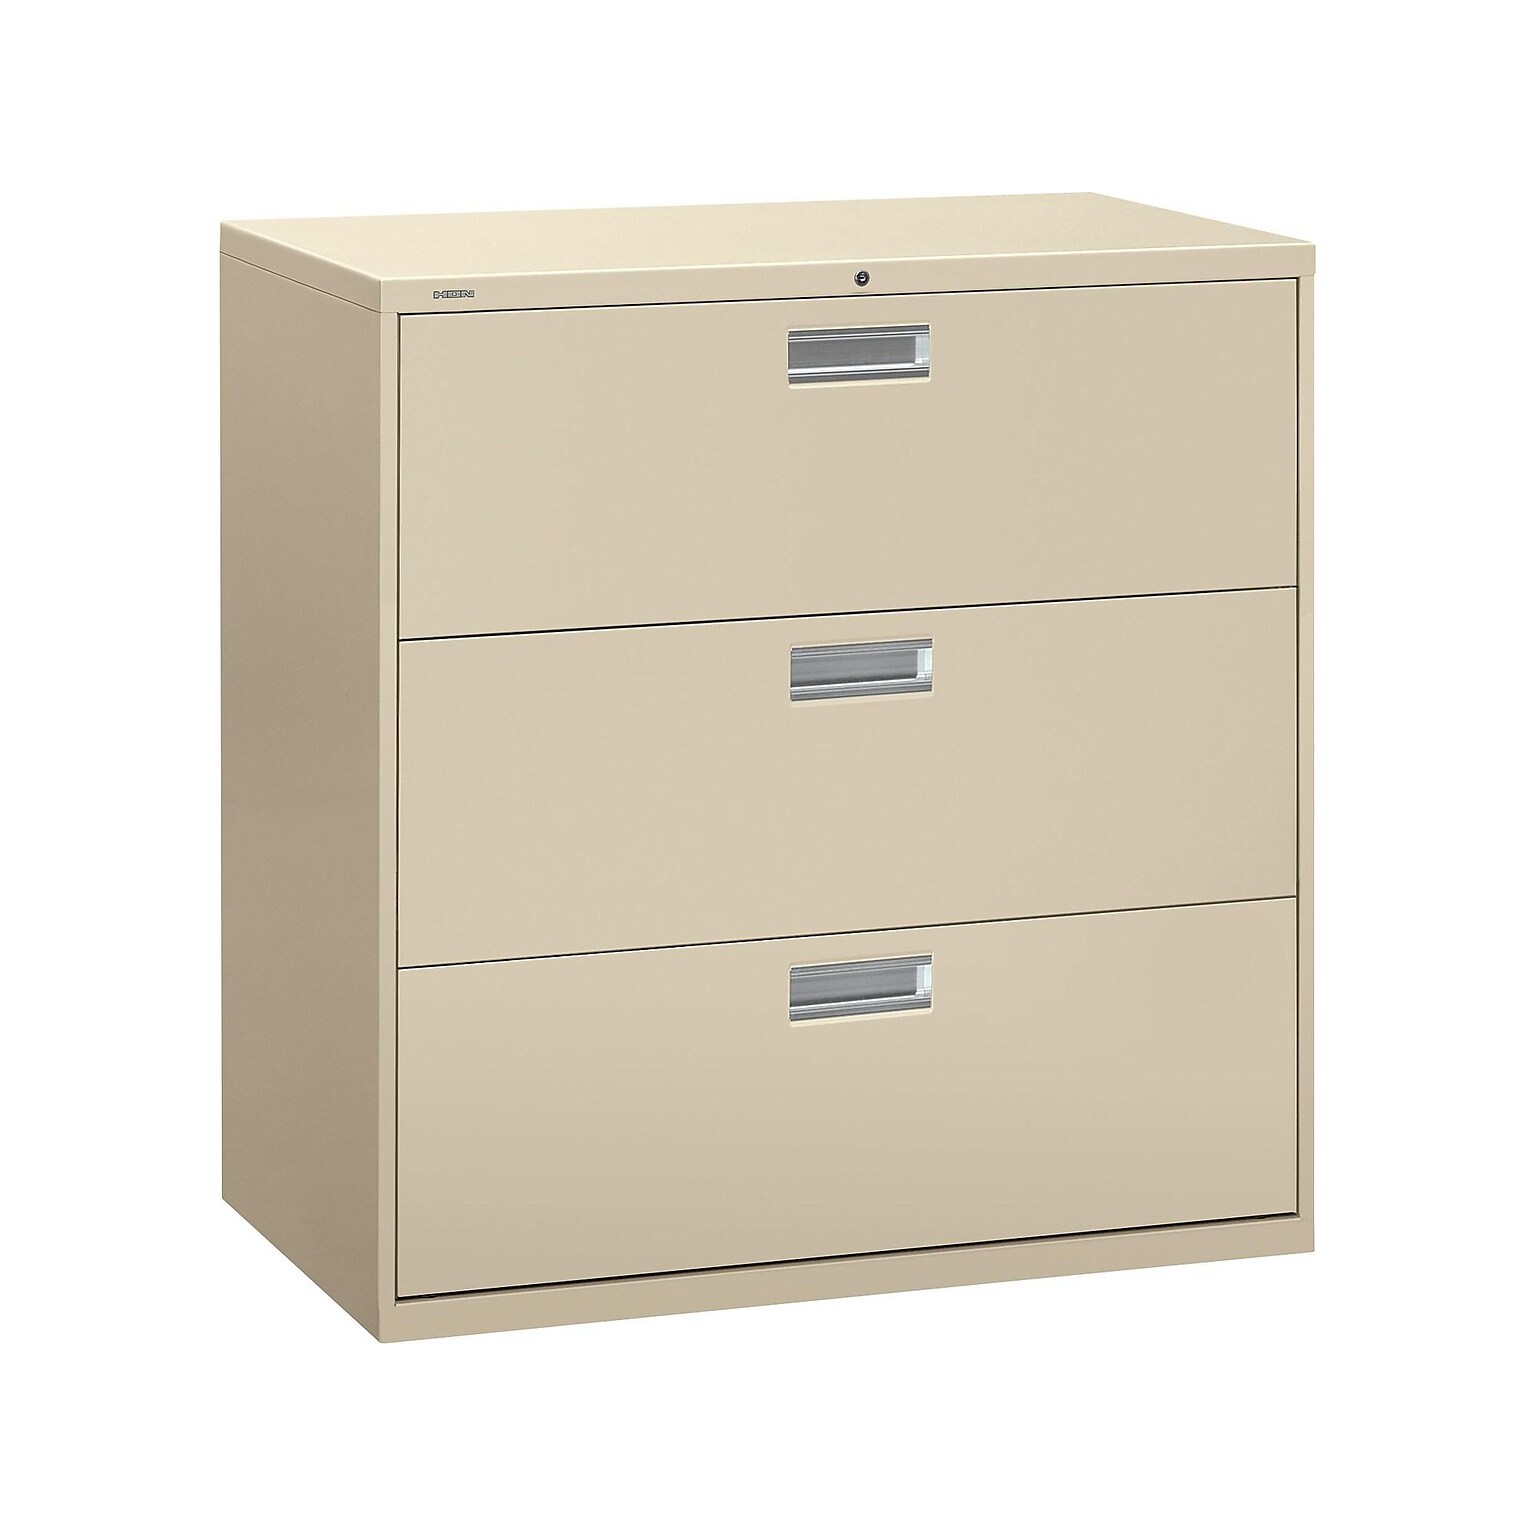 HON Brigade 600 Series 3-Drawer Lateral File Cabinet, Locking, Letter/Legal, Putty/Beige, 42W (H693.L.L)